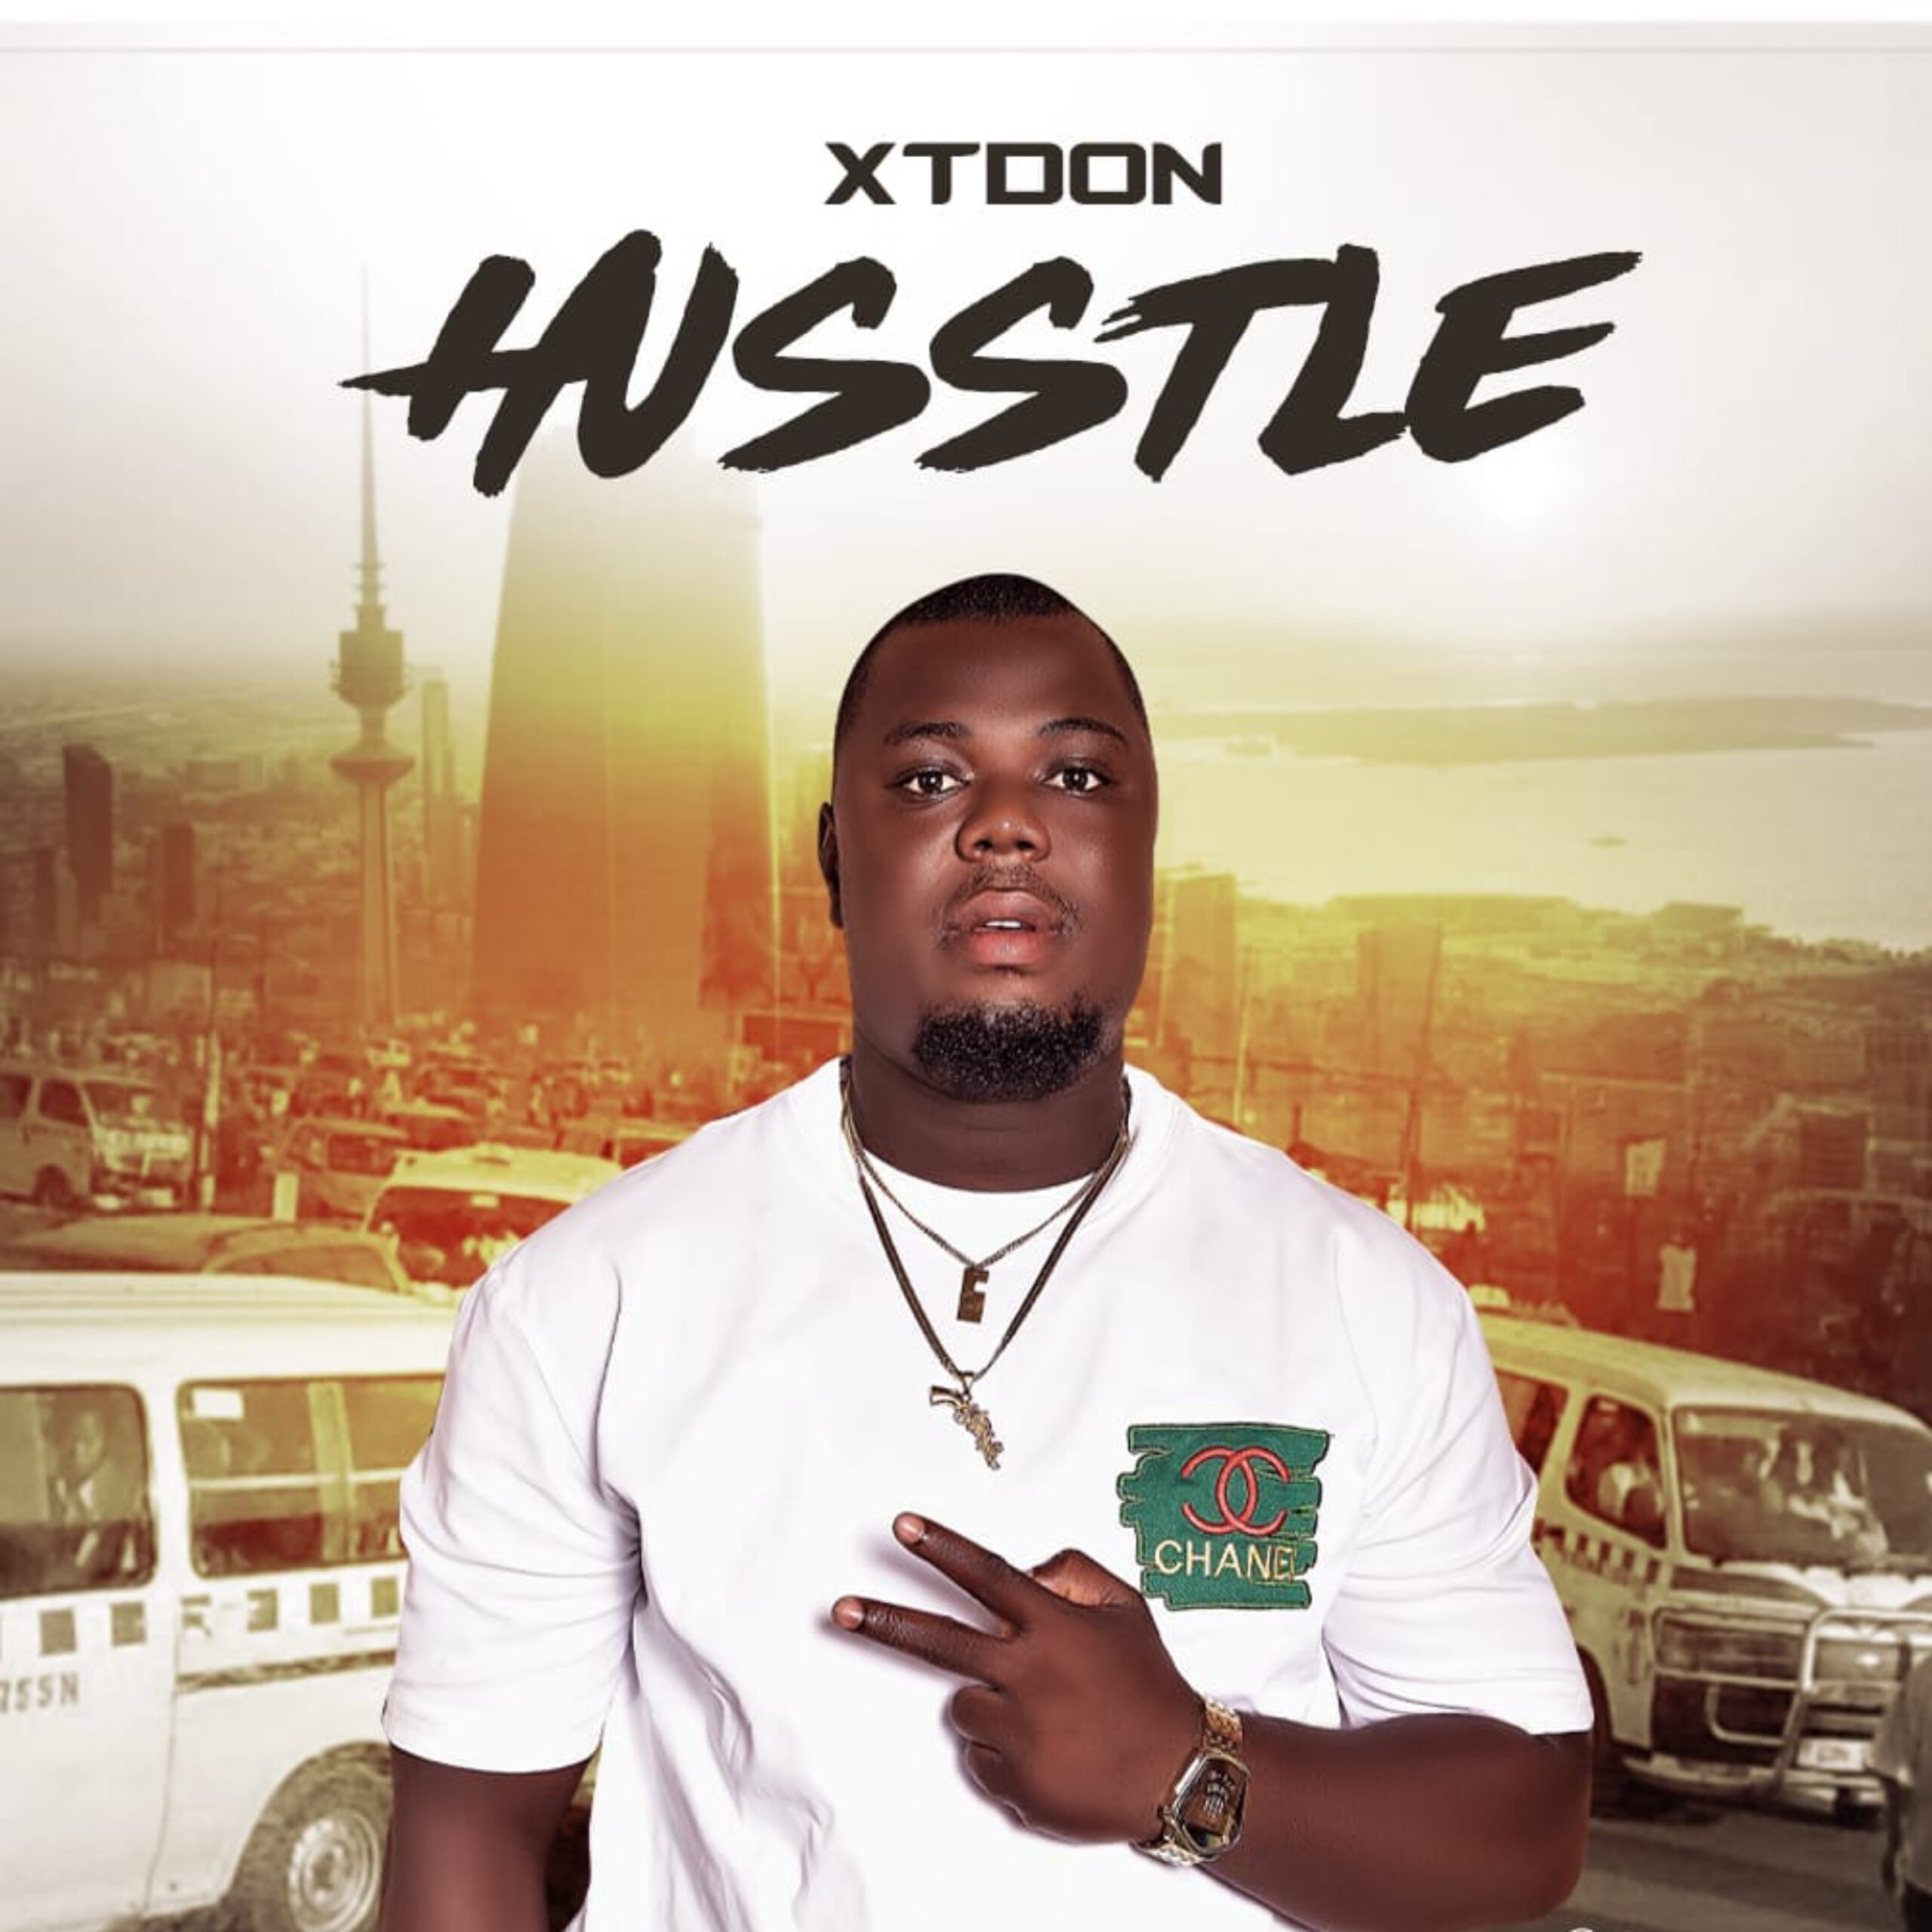 XT Don – Husstle Mp3 Download